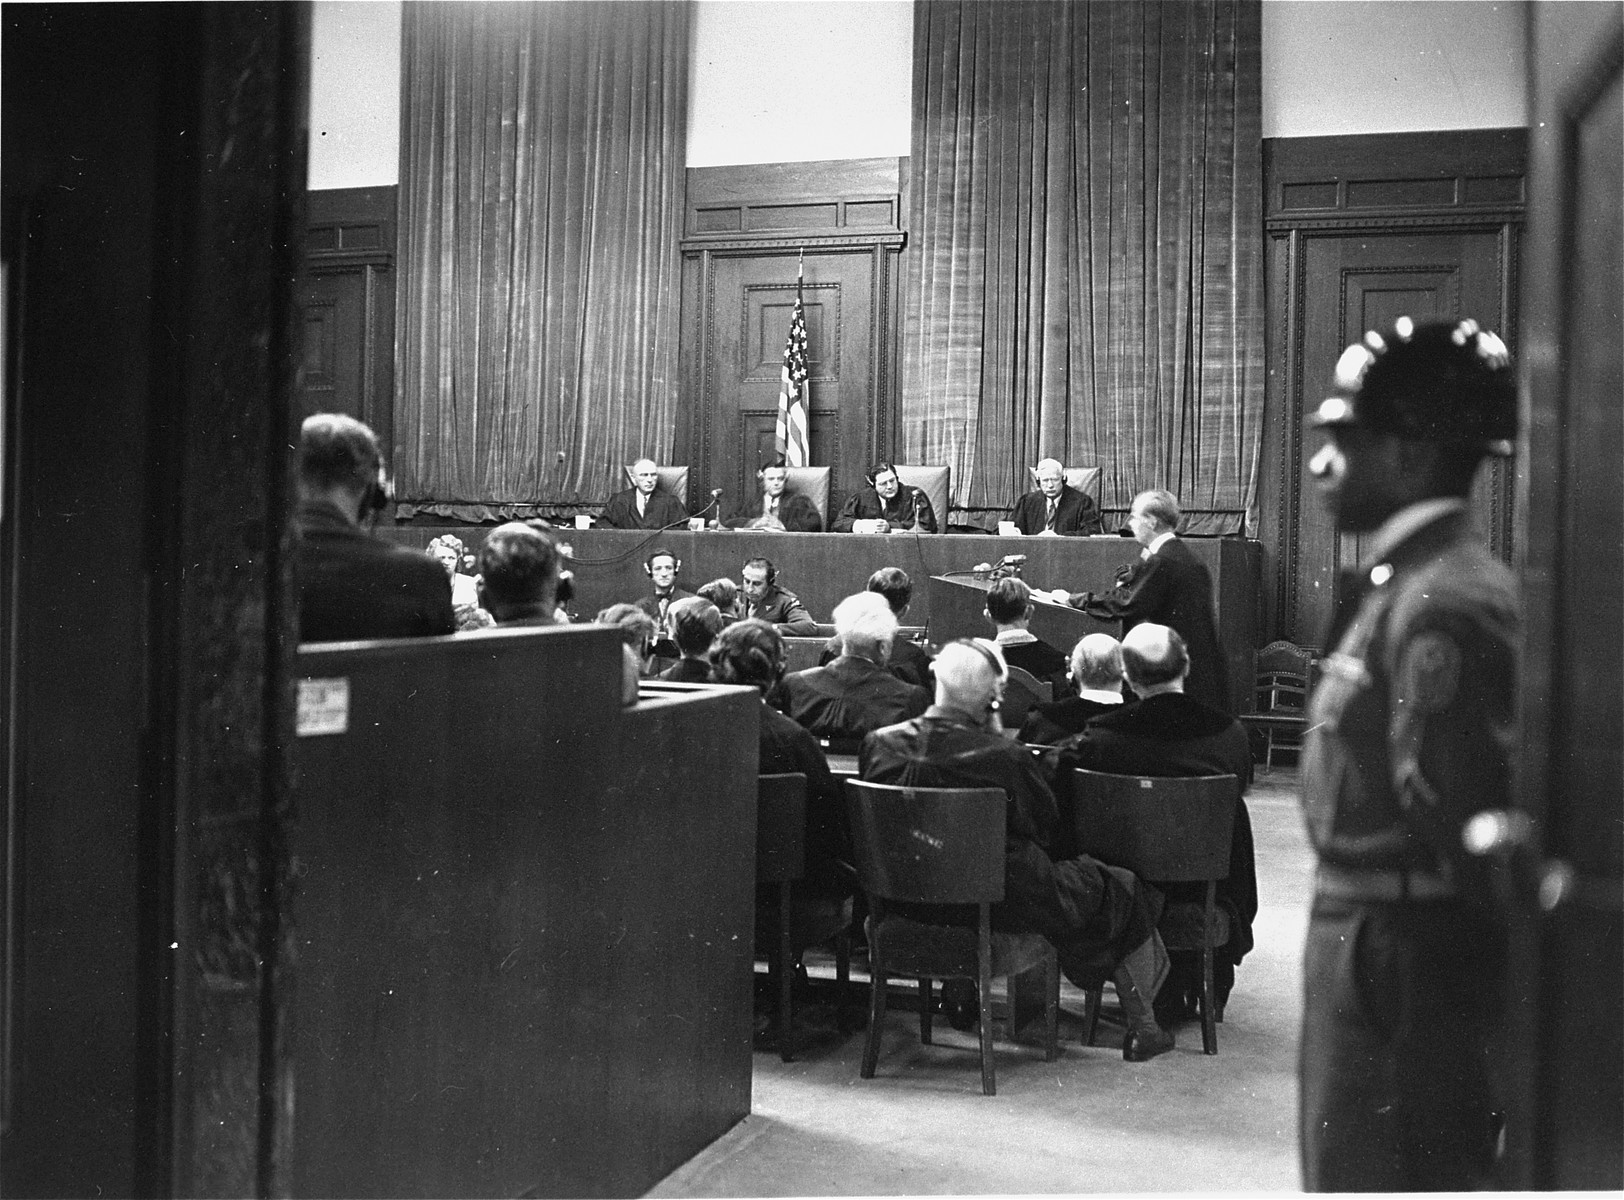 An American soldier guards the main entrance to the courtroom during the I.G. Farben Trial.  In the back sits the Military Tribunal VI.